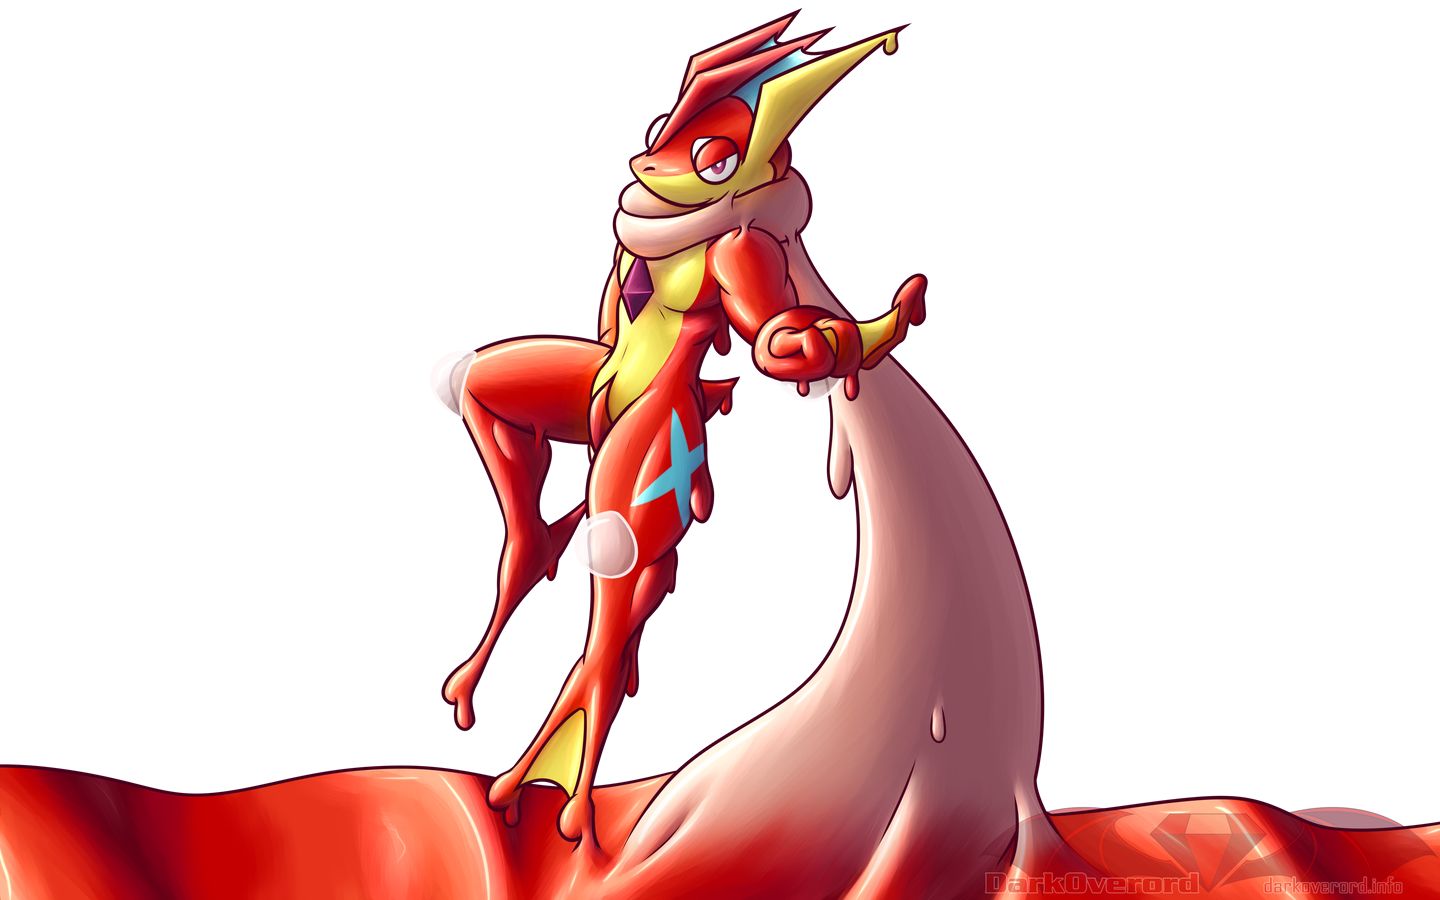 A red and yellow gooey greninja suspended in the air by it's tongue which is connected to a much larger mass of red goo at the bottom of the screen